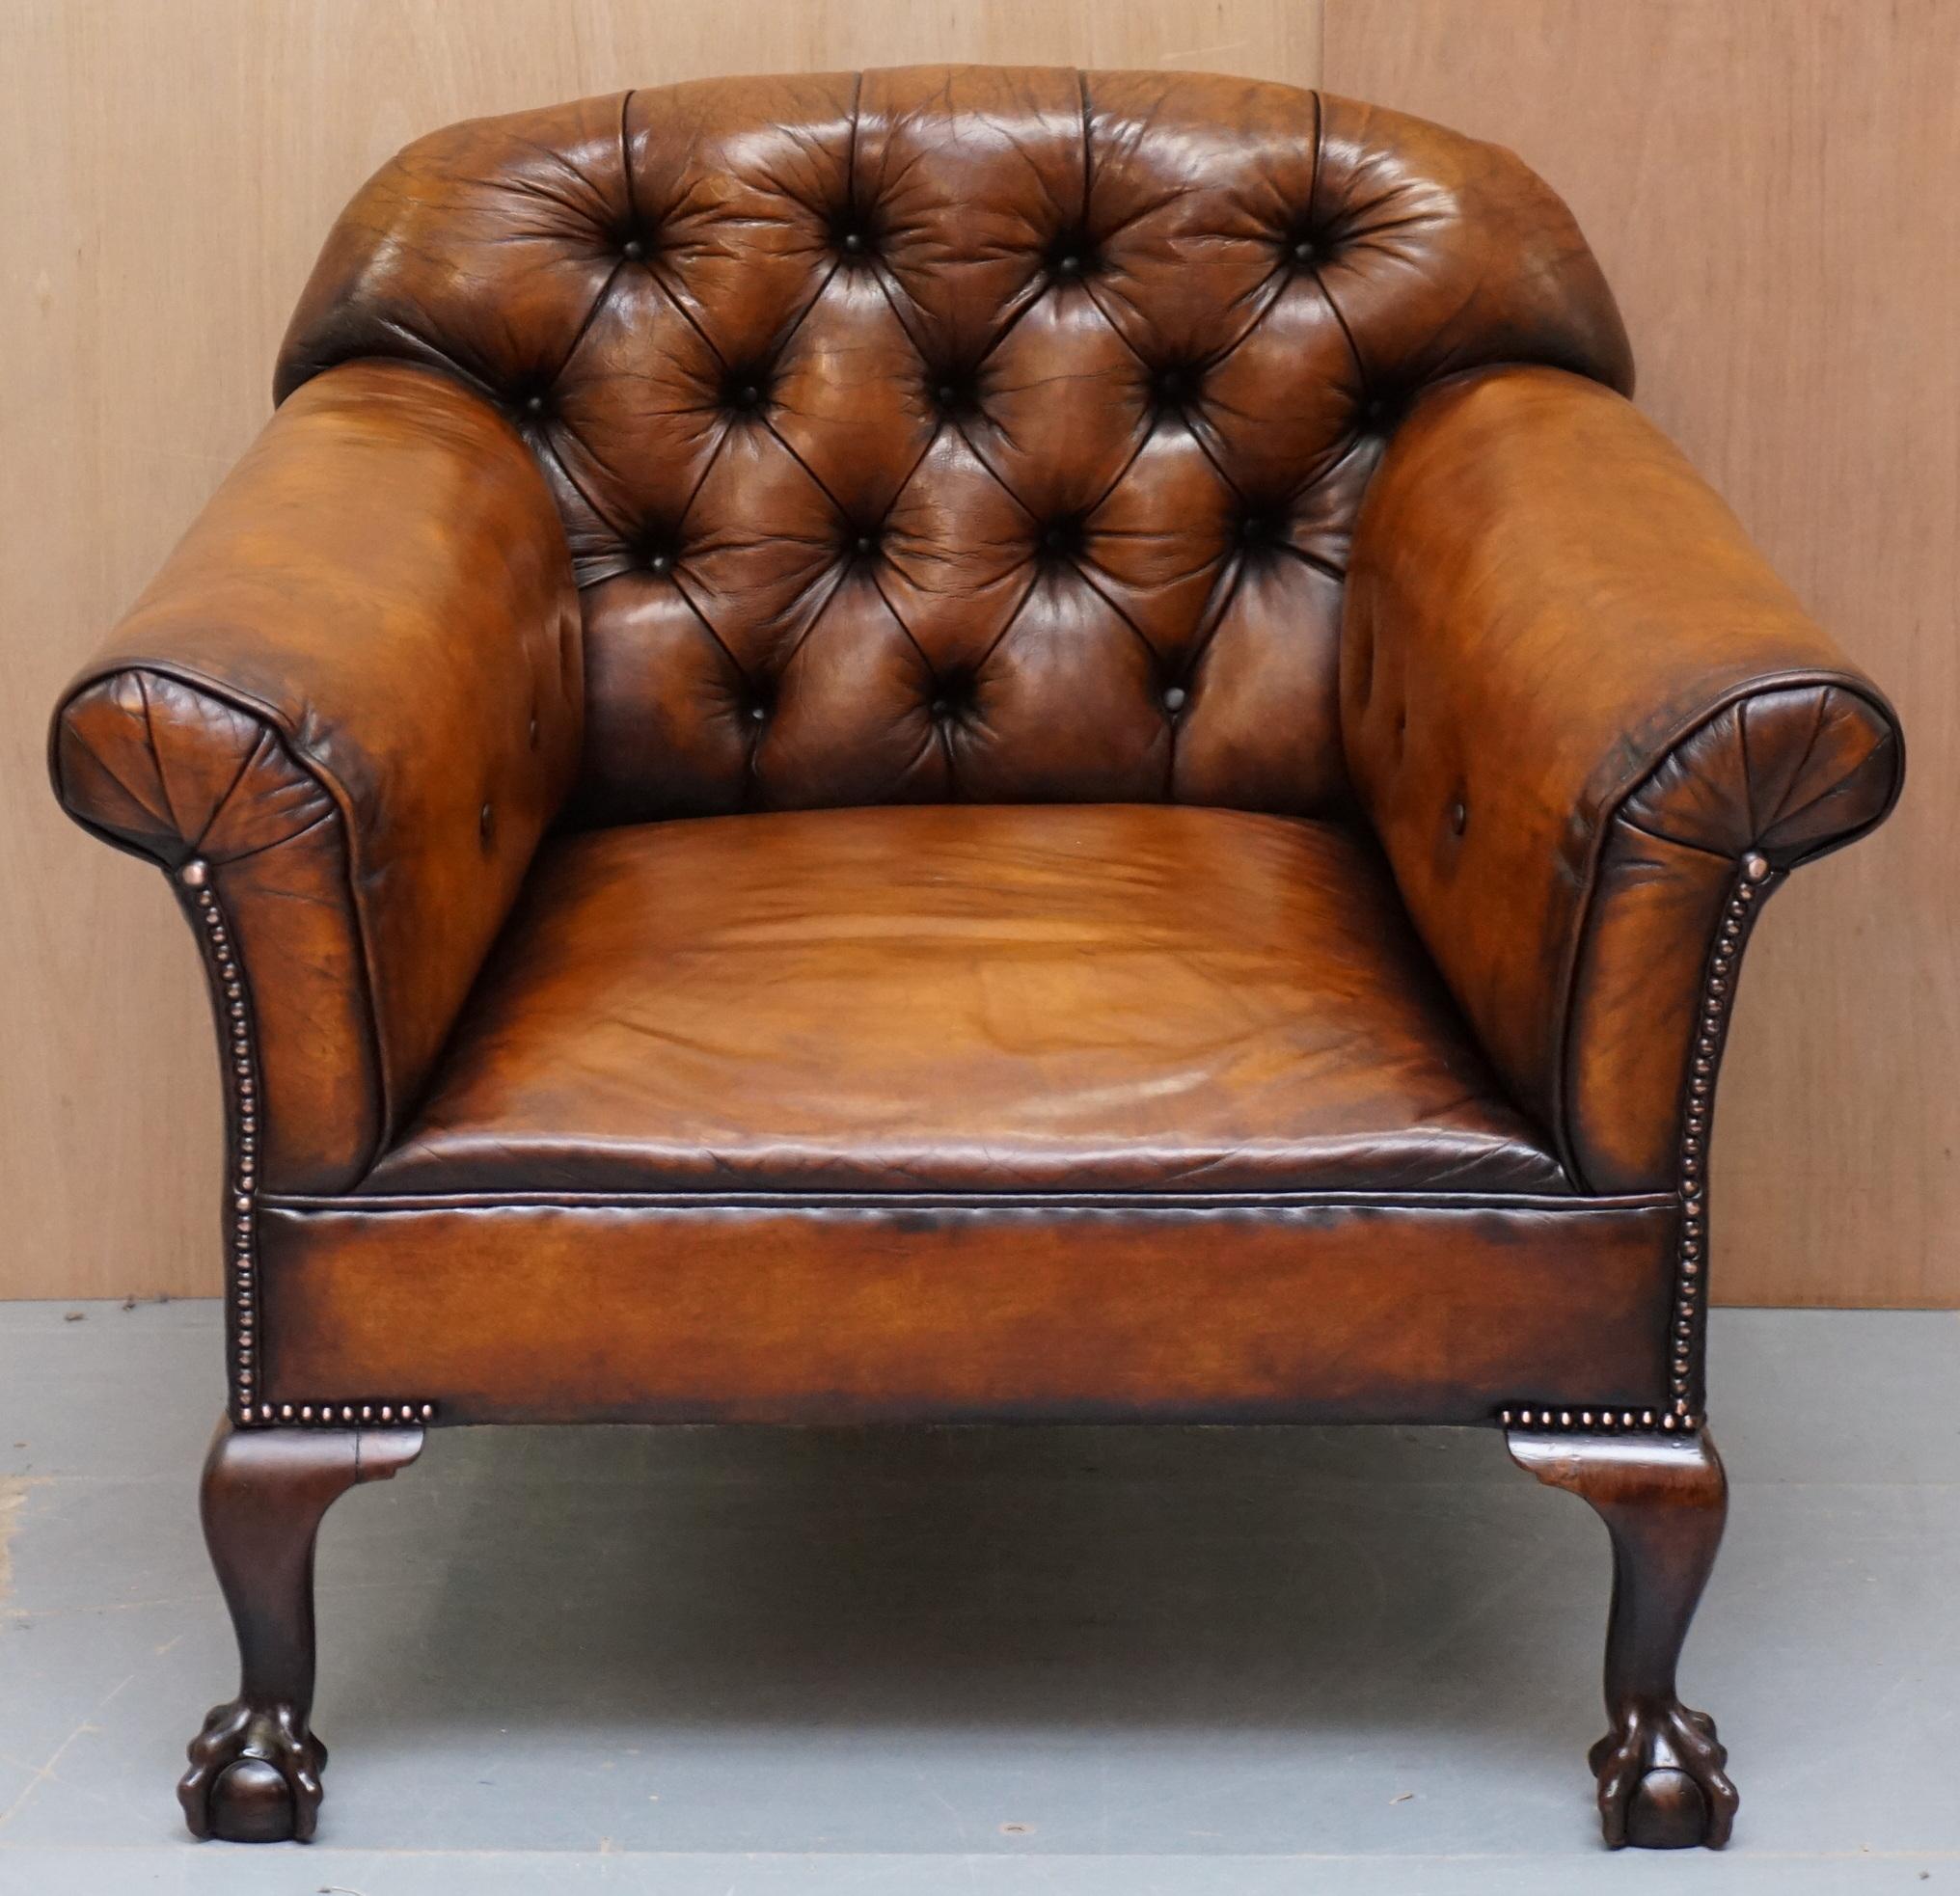 We are delighted to offer for sale this stunning original fully restored hand dyed Whisky brown leather club armchair with hand carved Claw & ball feet

A very rare and desirable piece of exceptionally quality, this chair is fully coil sprung all